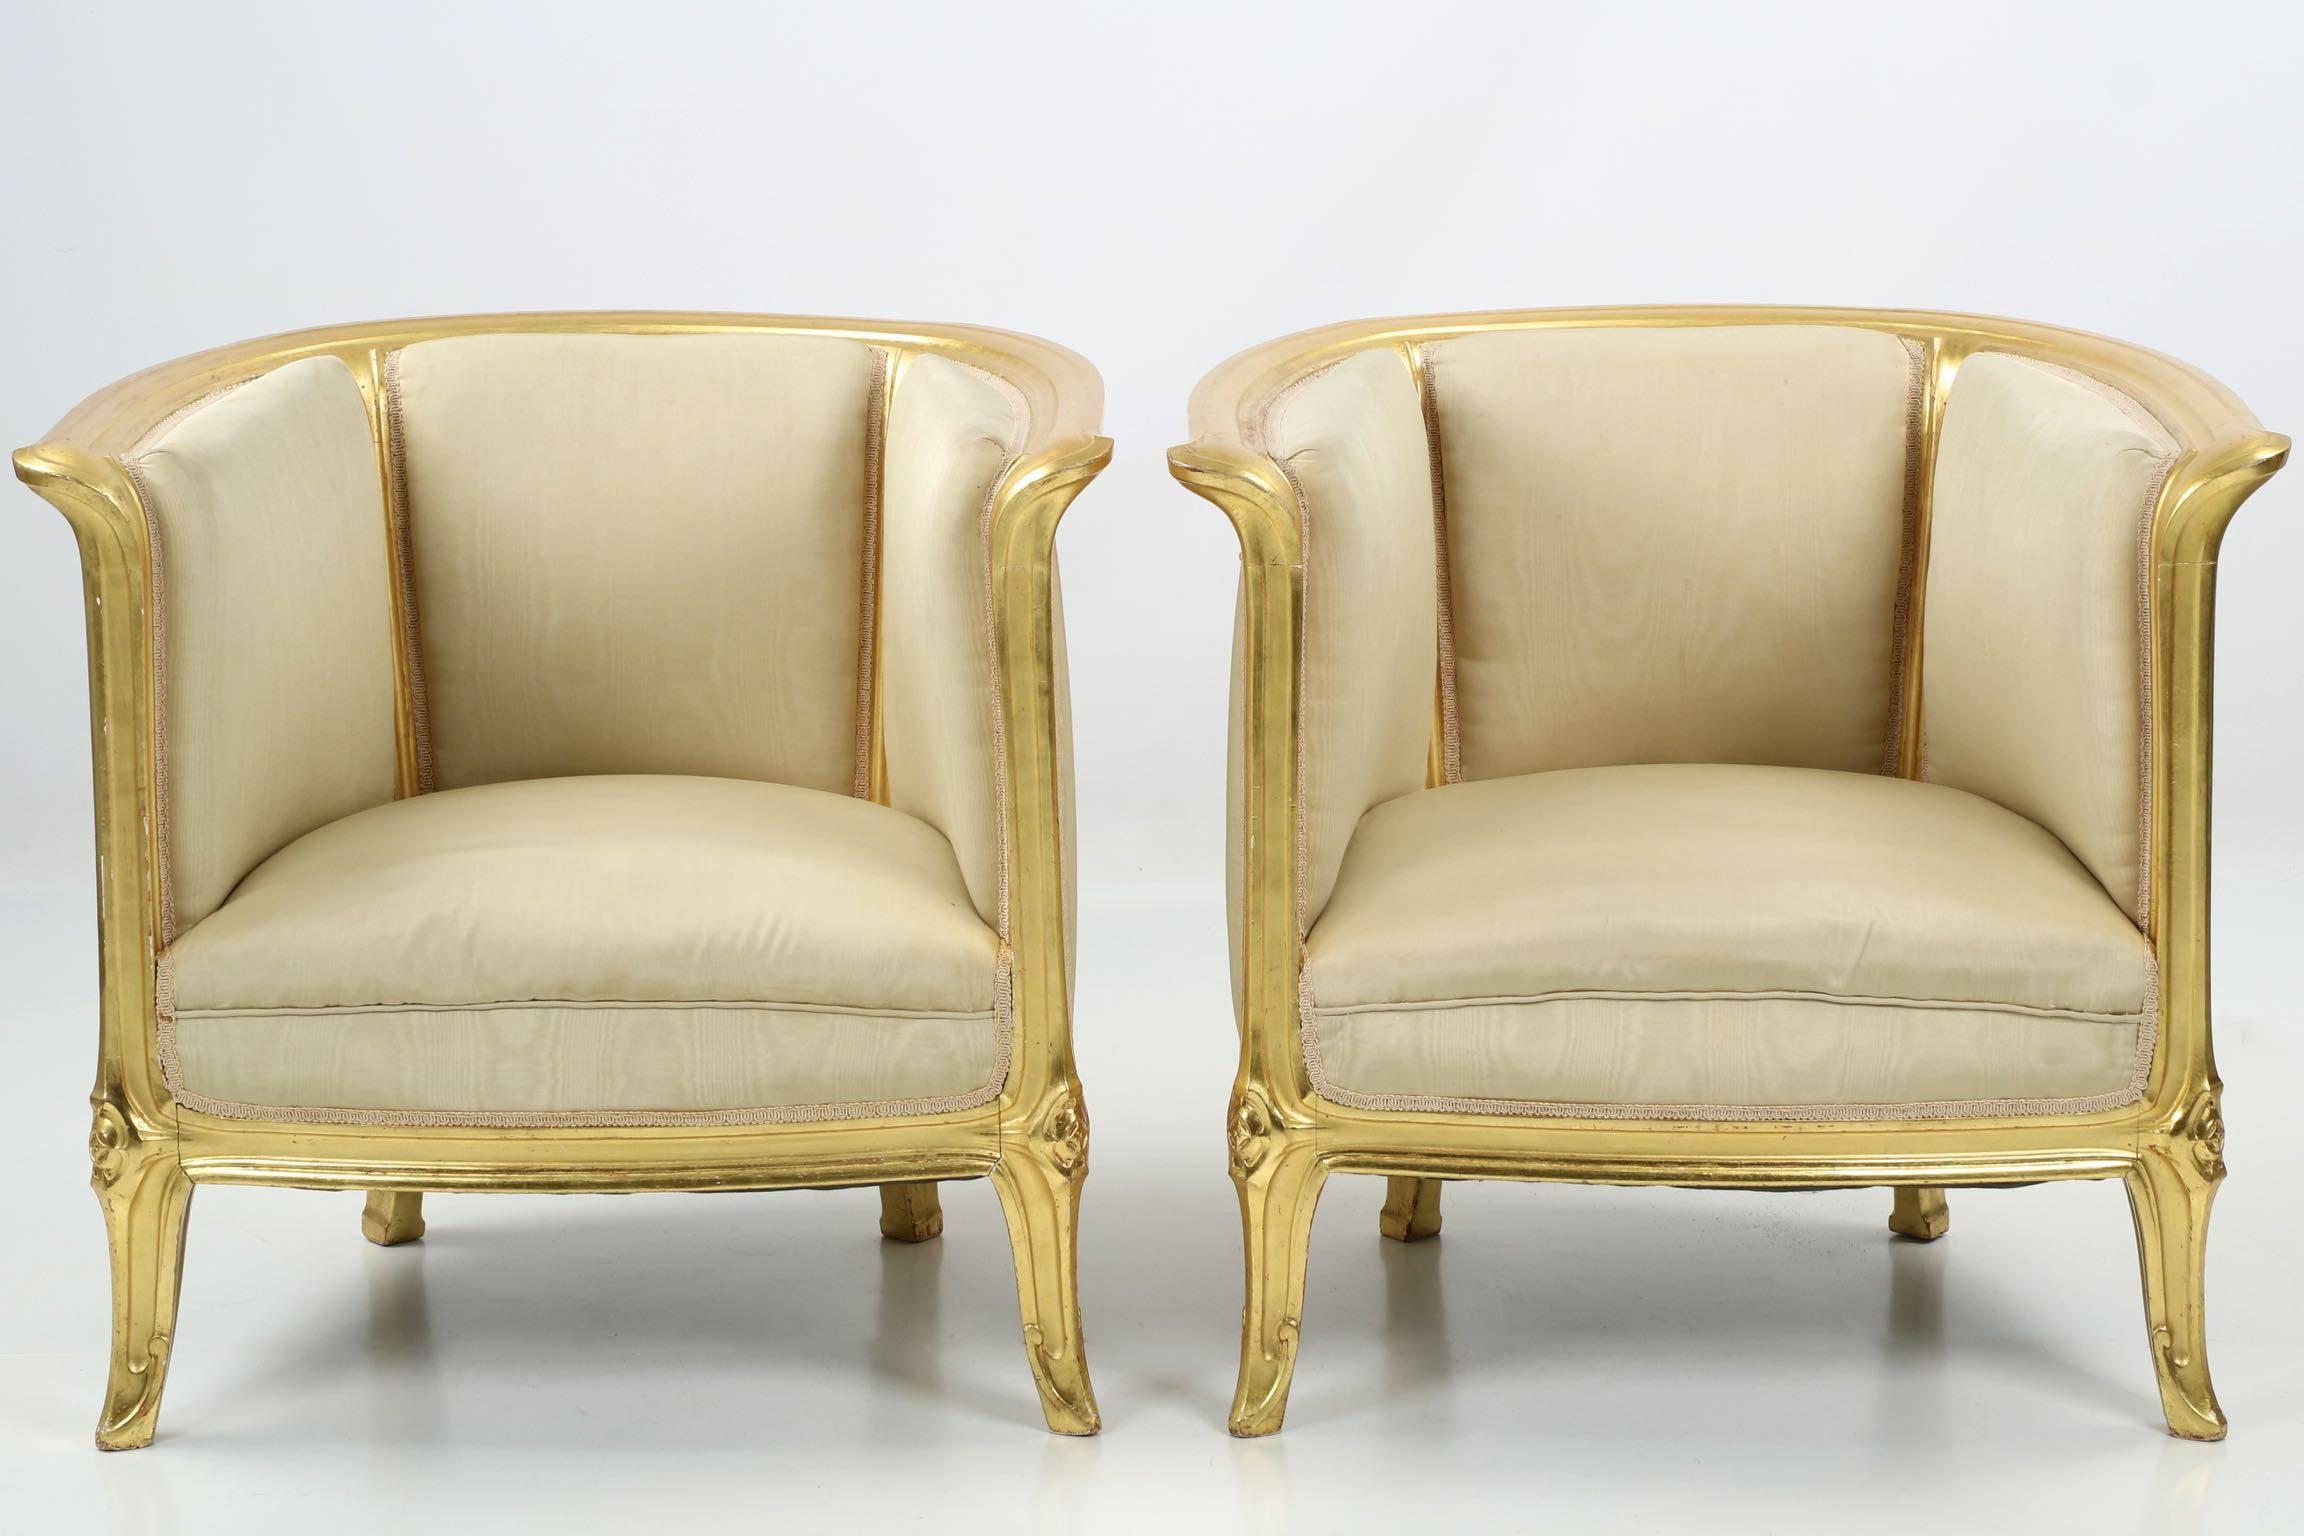 A perfectly designed and proportioned pair of Art Nouveau tub chairs executed in beechwood with brilliant gilt surfaces, they exhibit precise and gorgeous craftsmanship in remarkably heavy frames.  The design is loosely inspired by the curvy nature